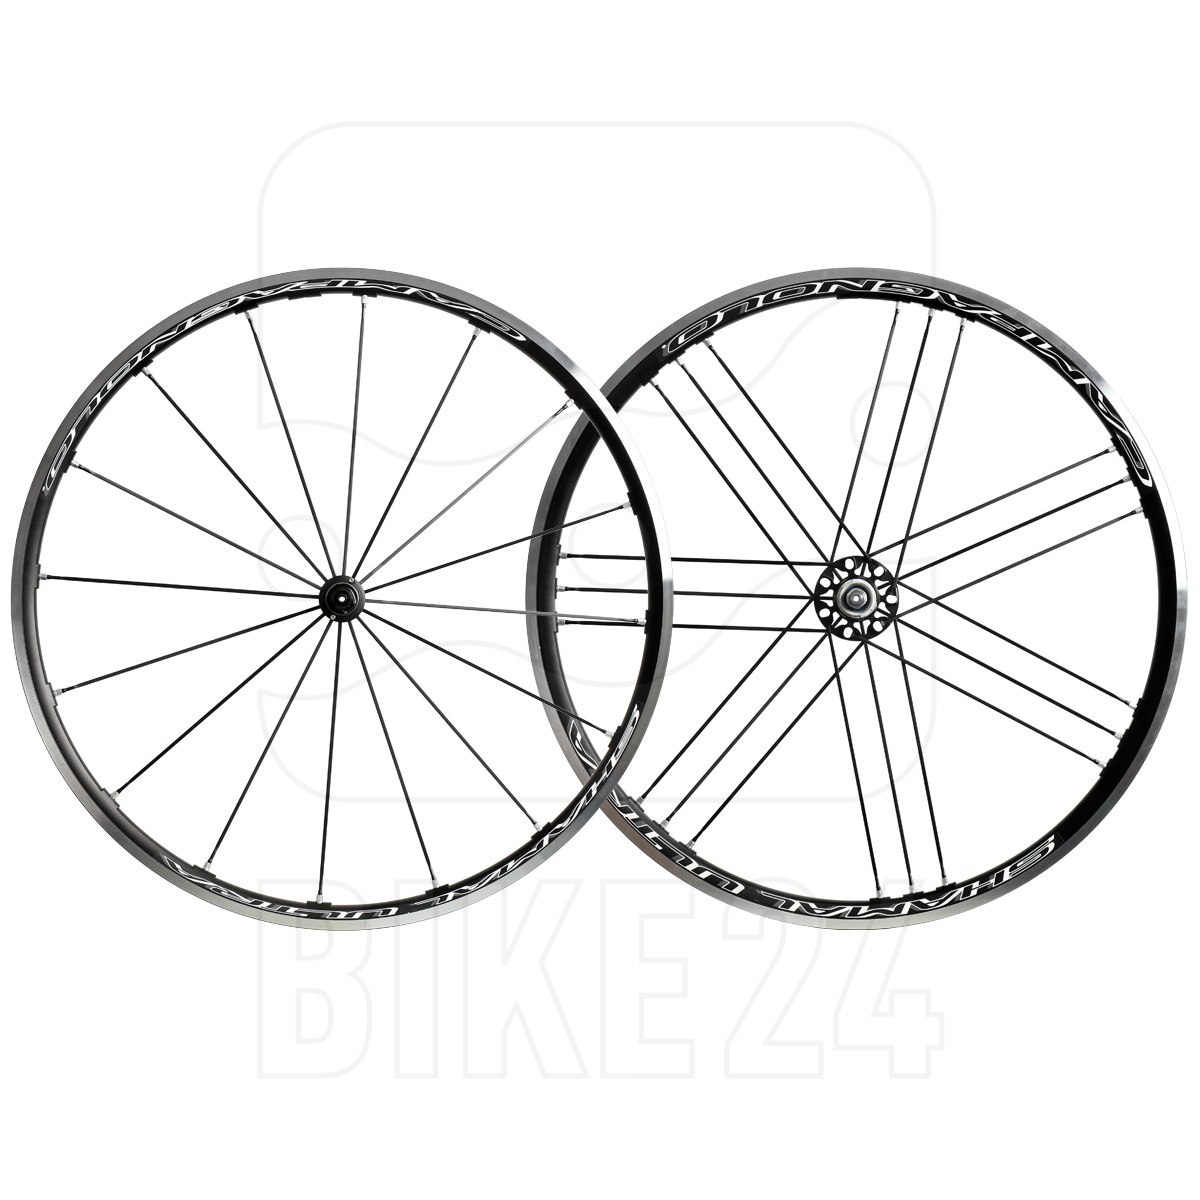 Picture of Campagnolo Shamal Ultra C17 Wheelset Clincher - black